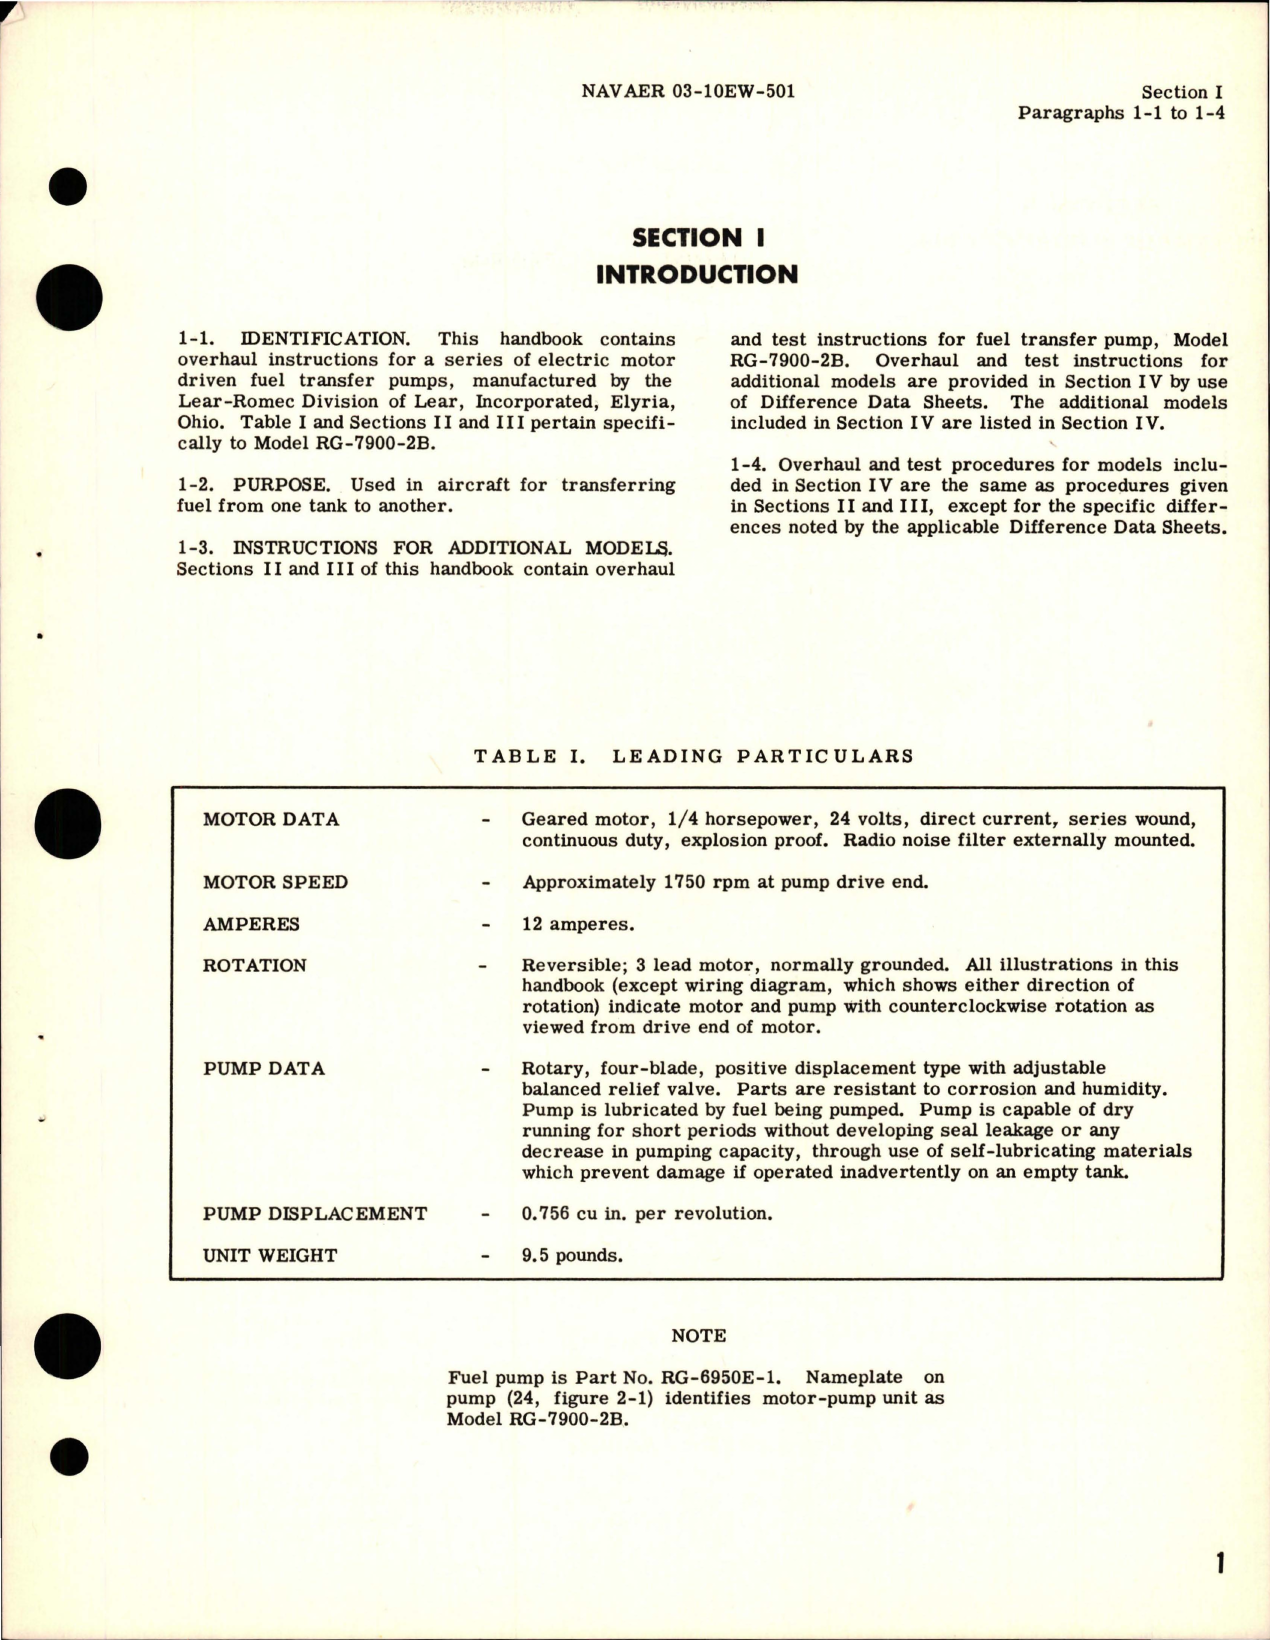 Sample page 5 from AirCorps Library document: Overhaul Instructions for Fuel Transfer Pump - Electric Motor Driven - Models RG-7900-2A, RG-7900-2B 